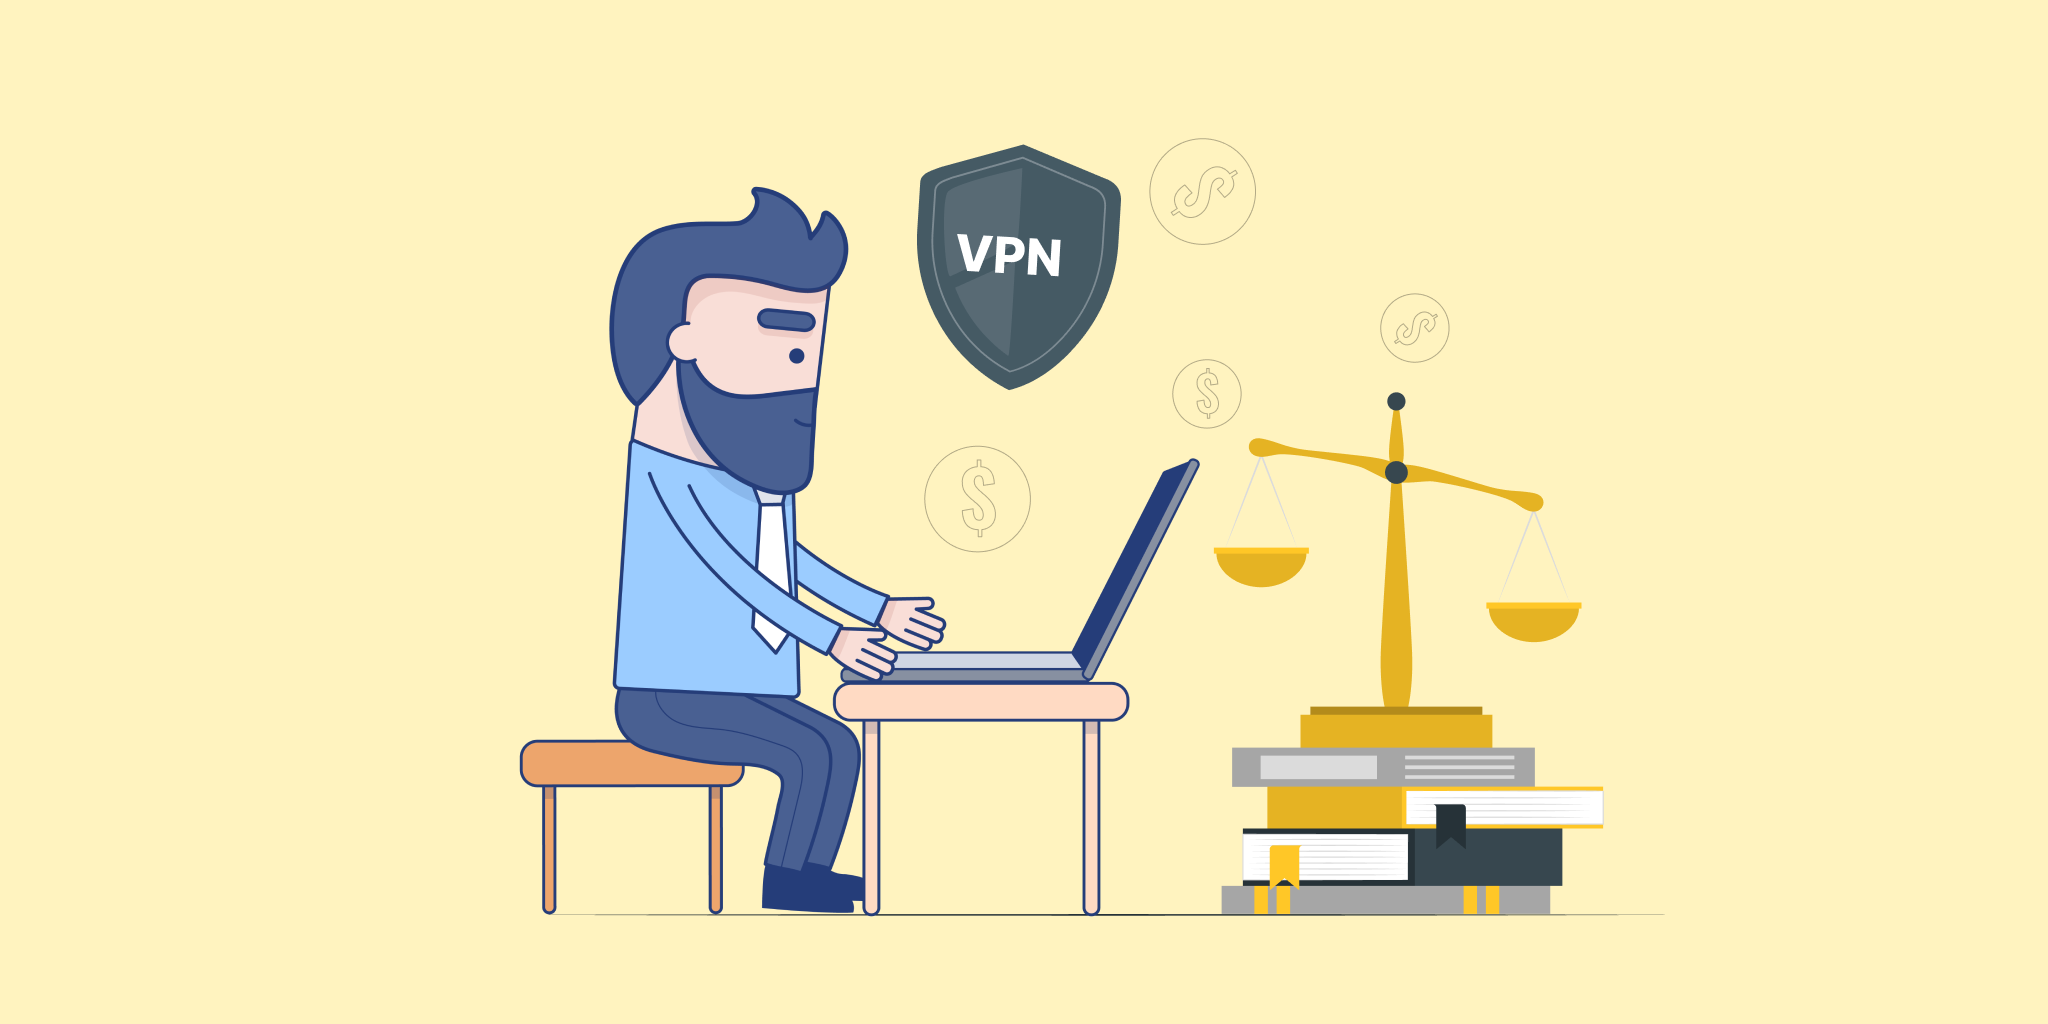 Is Using VPN for Matched Betting Legal?